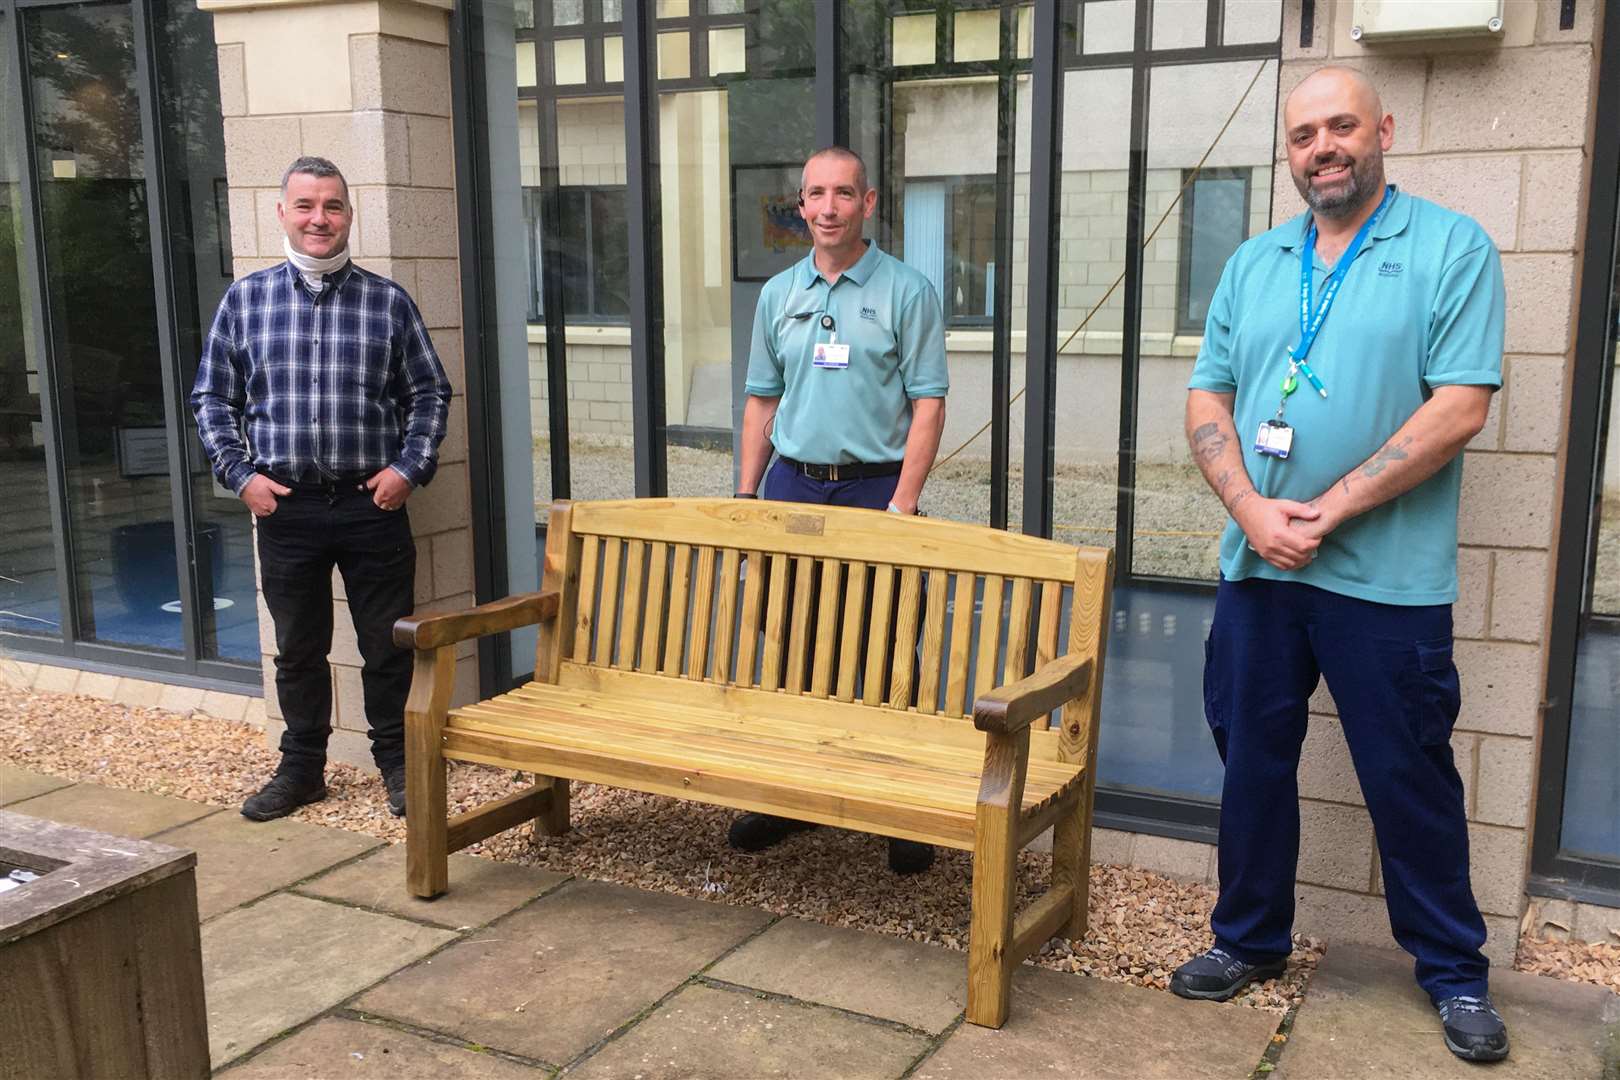 (From left) Ross Gordon, of DRG Services Spey Bay, with Dr Gray's Hospital porters Ritchie Hoe and Tim Wakefield with the new bench for the sensory garden. Picture: Liz Tait.